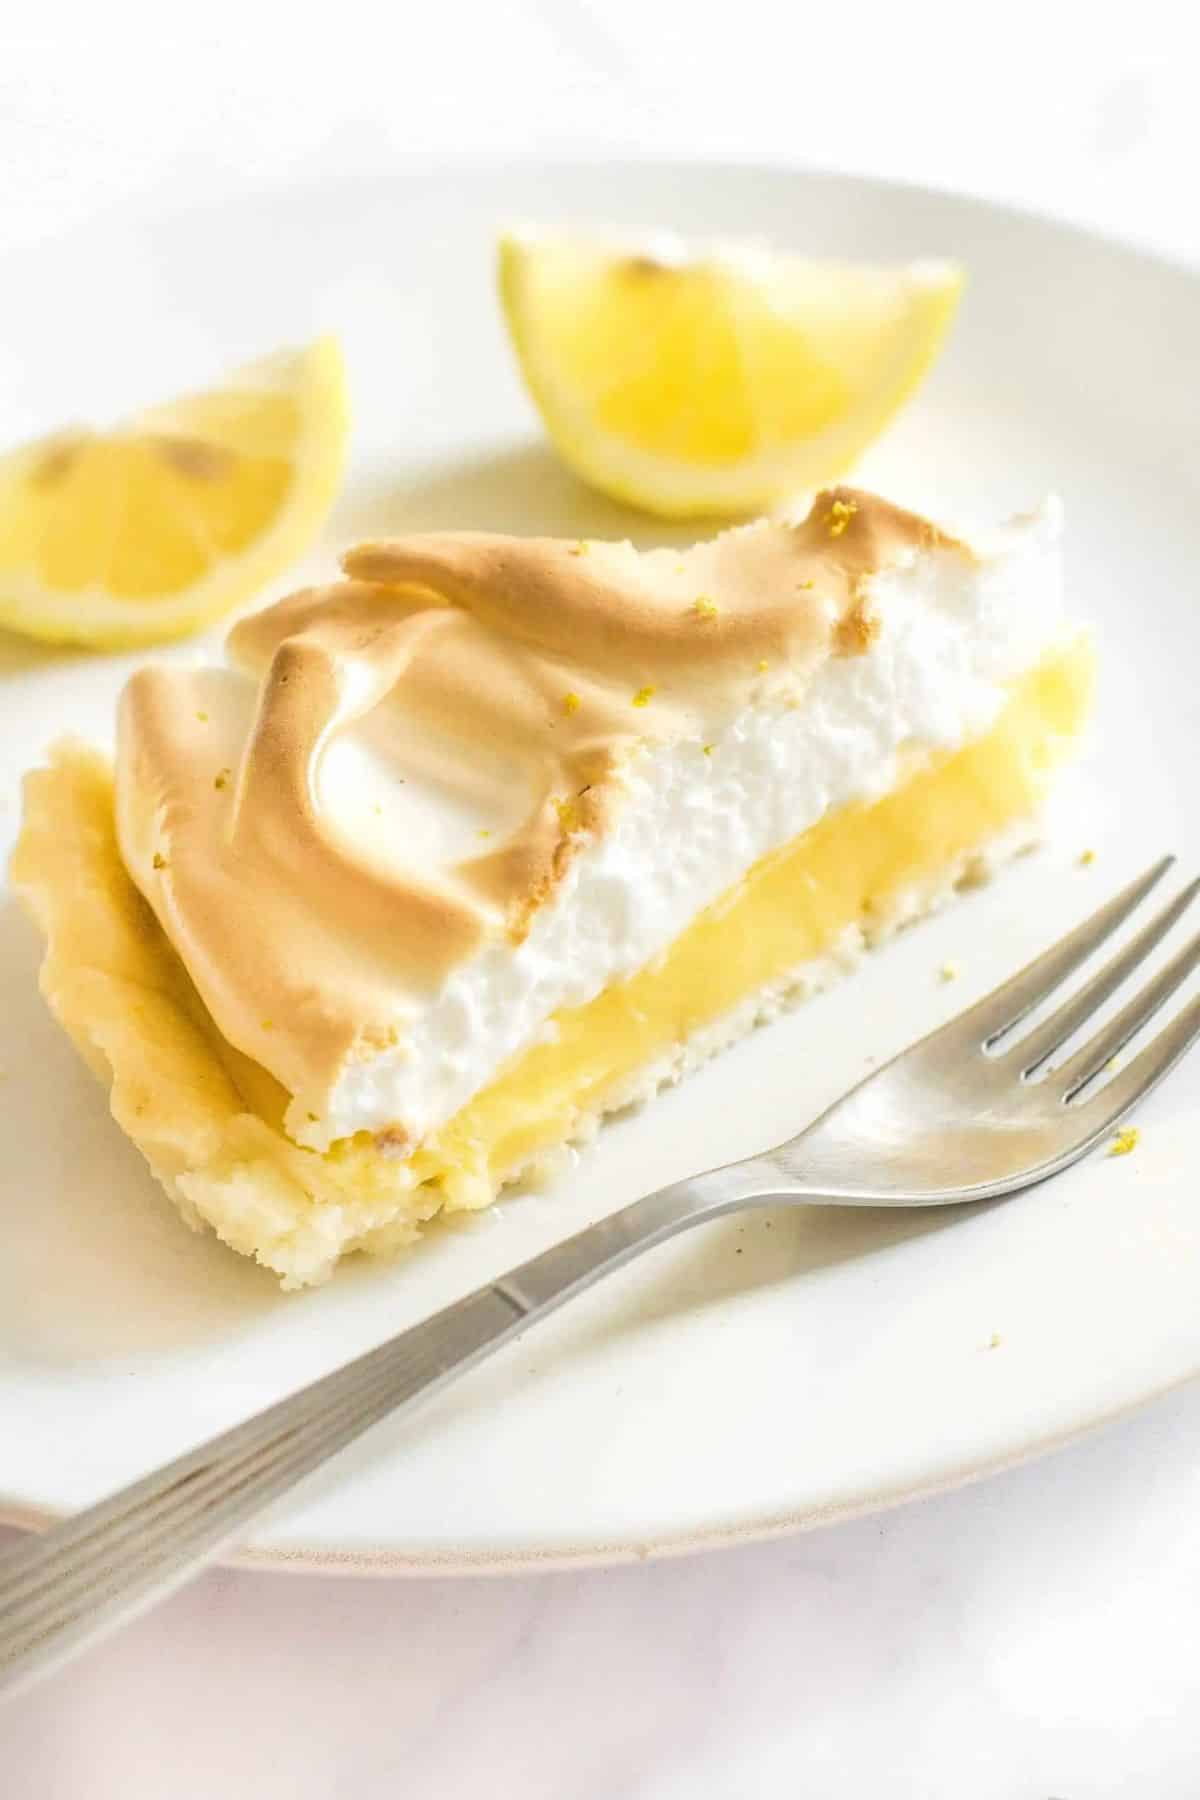 A piece of Lemon Meringue Pie on a white plate with a fork and two piece of lemon.